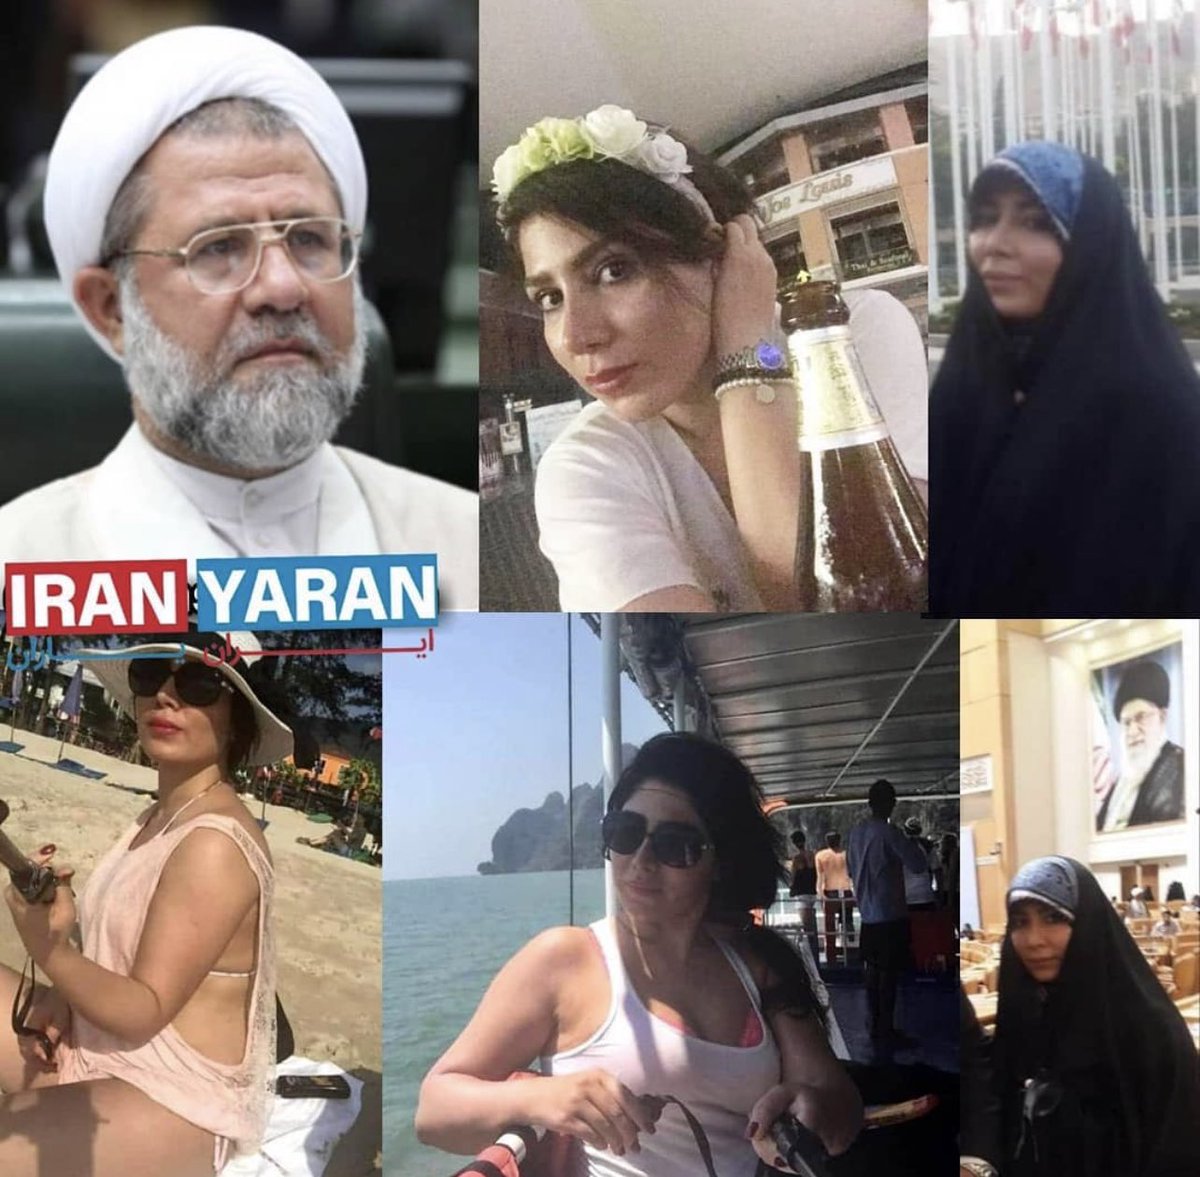 The same Islamic Regime in Iran who allows their daughters to freely roam are the same extremist who are forcing women in Iran to follow their disgusting laws. Your daughter can show her body and hair but you kill women who don’t cover head to toe? 🤮 BISHARAF